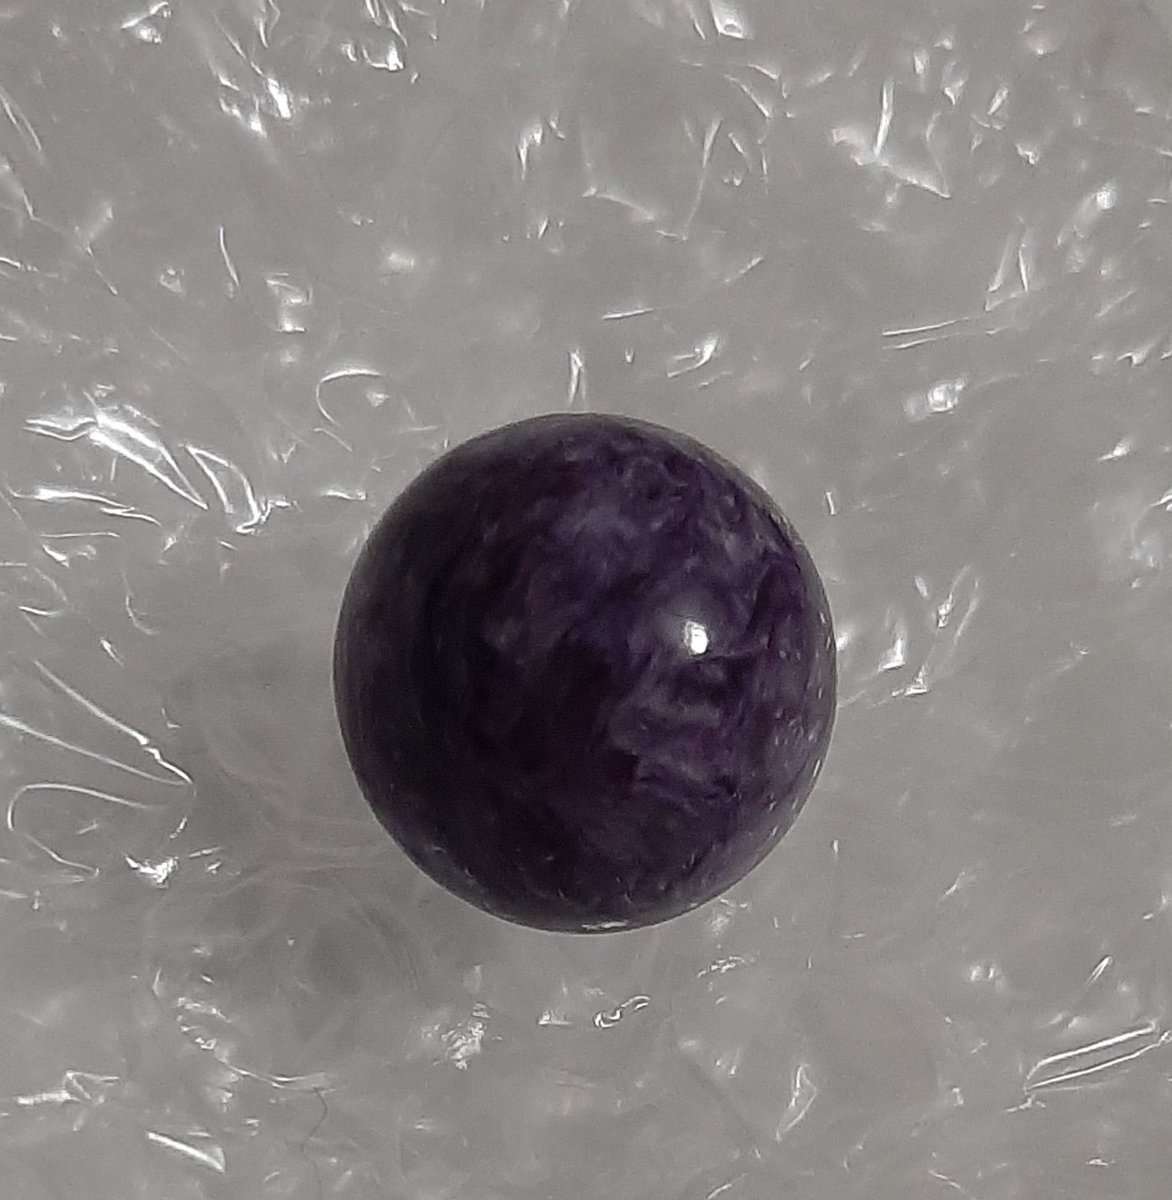 Oldest of the three orders! And the one I messed my address up on  but Jac is, I repeat, great! Part of it would NOT photograph well so that's a short video in the Next tweet. For this one: tiny baby piece of high quality charoite. So purple!!  @VagabondTabby would love.